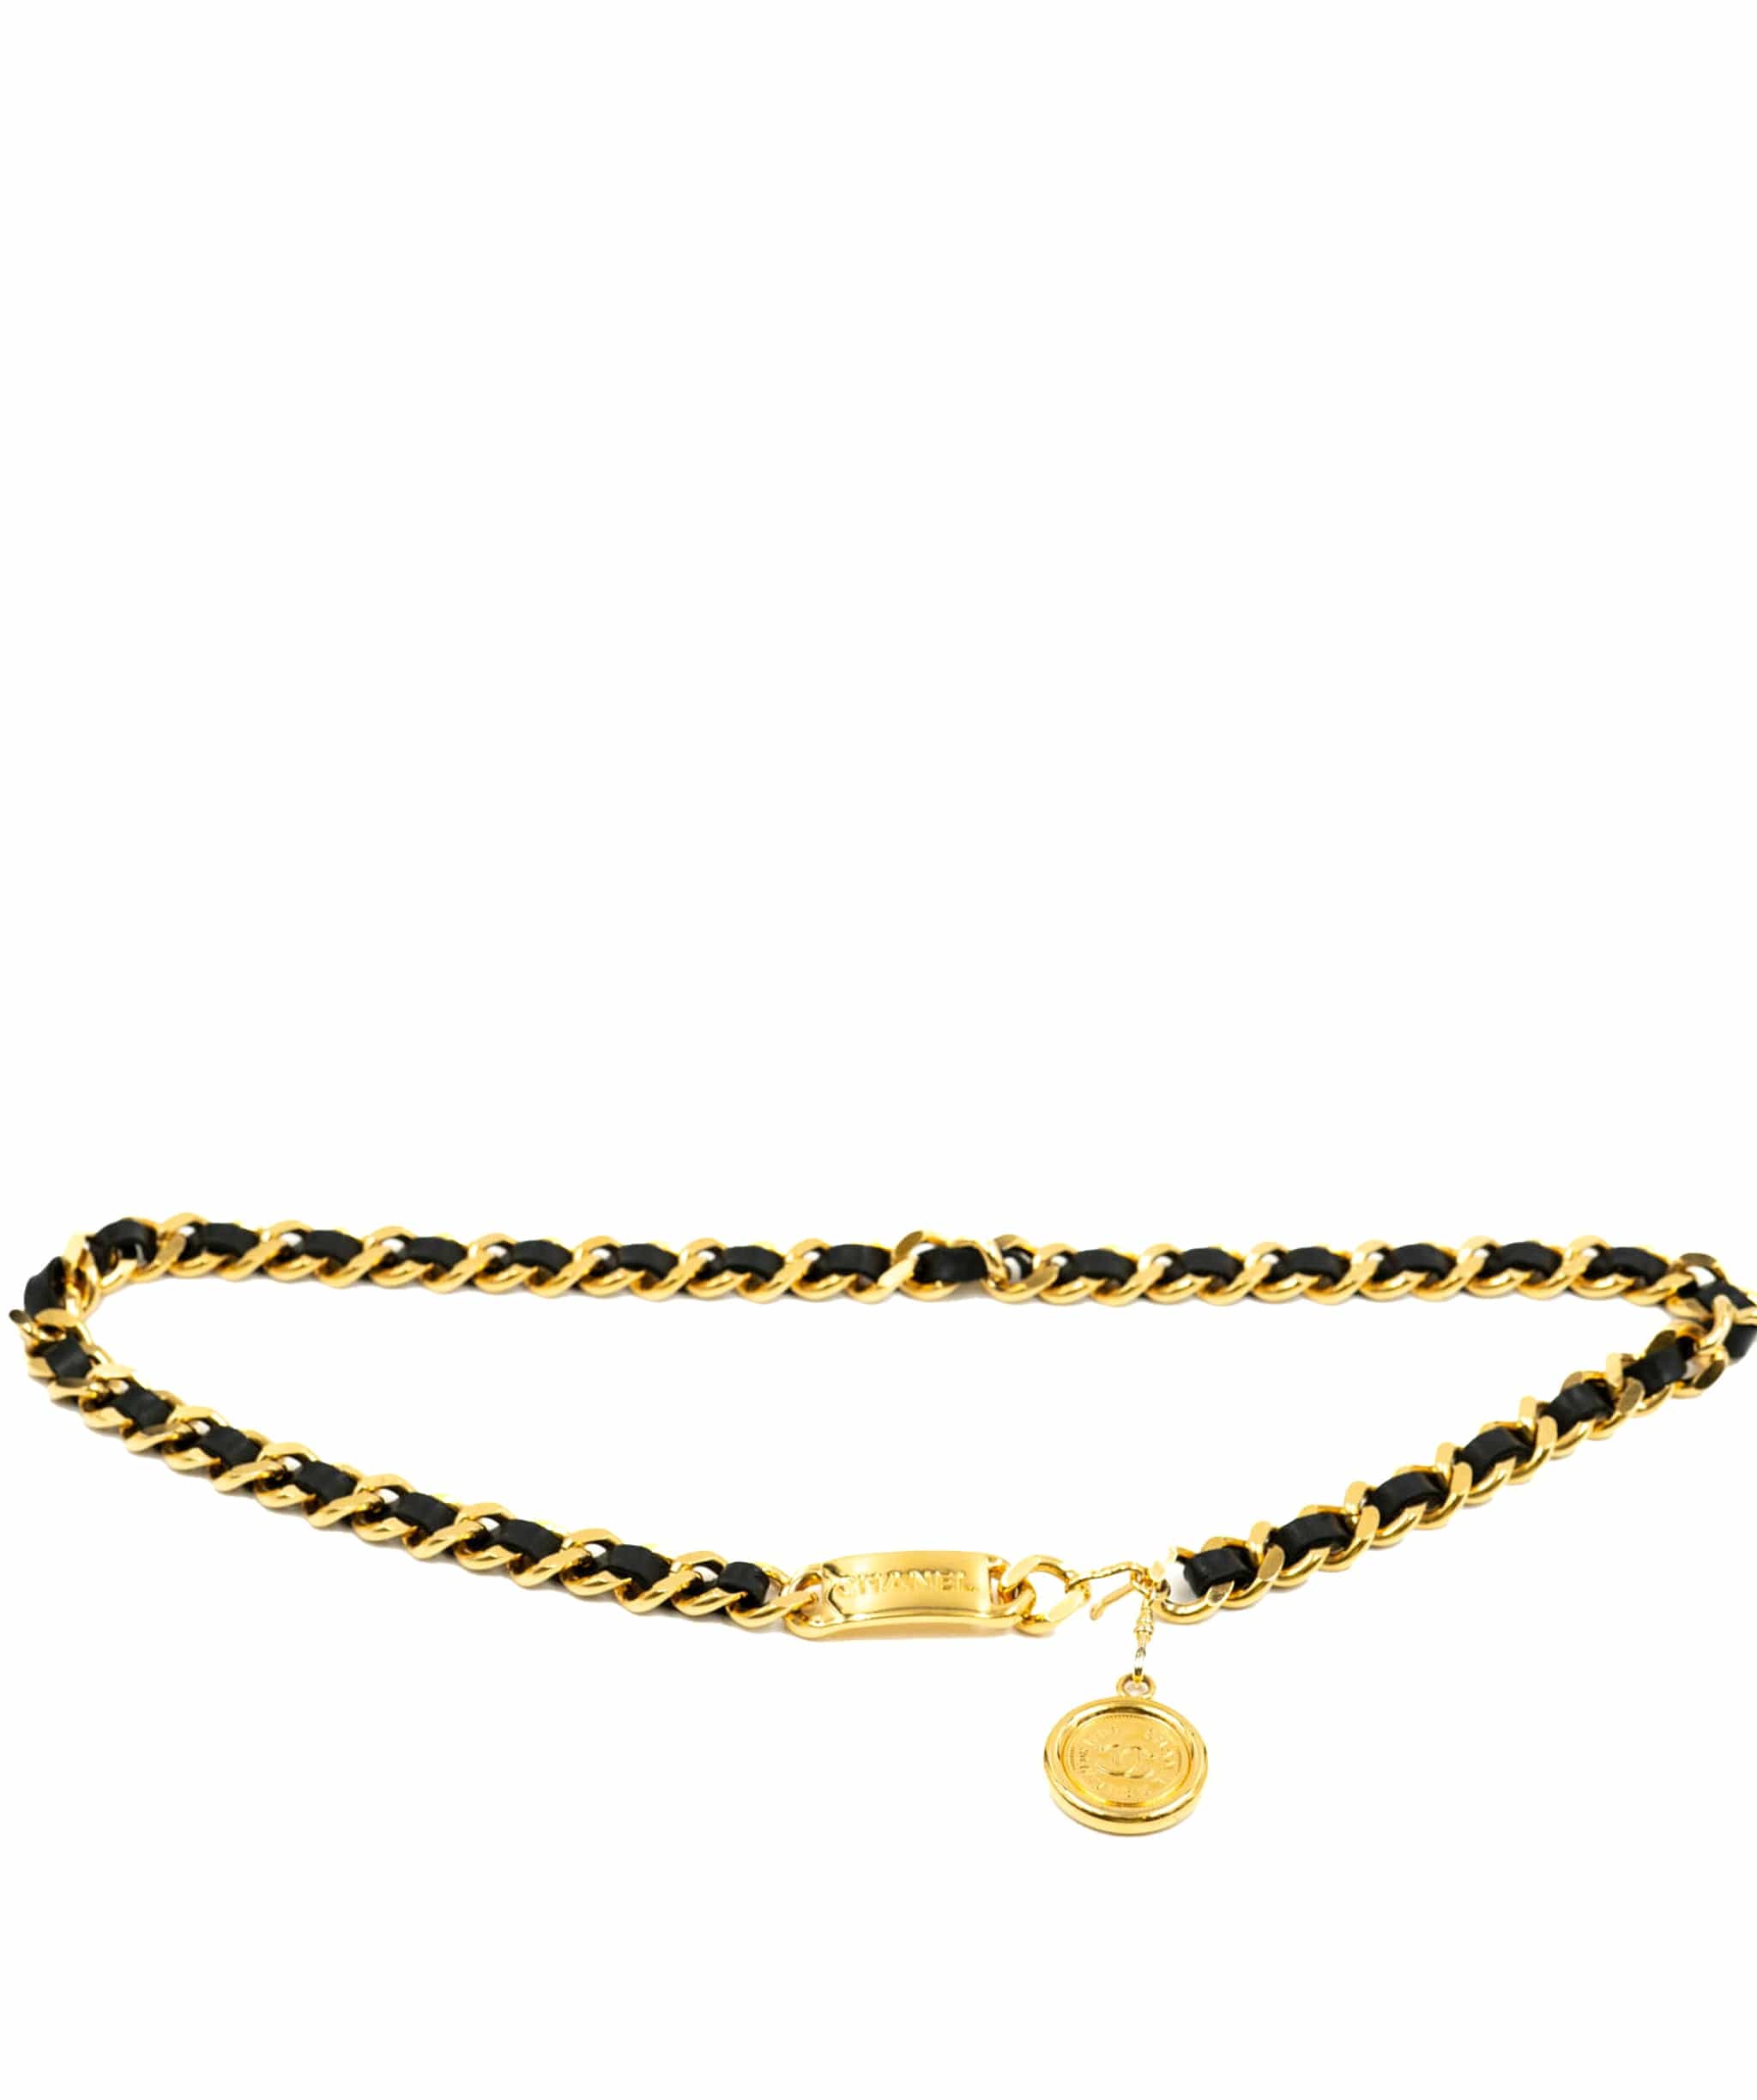 Chanel Chanel gourmette gold and black leather chain belt - AWL3876